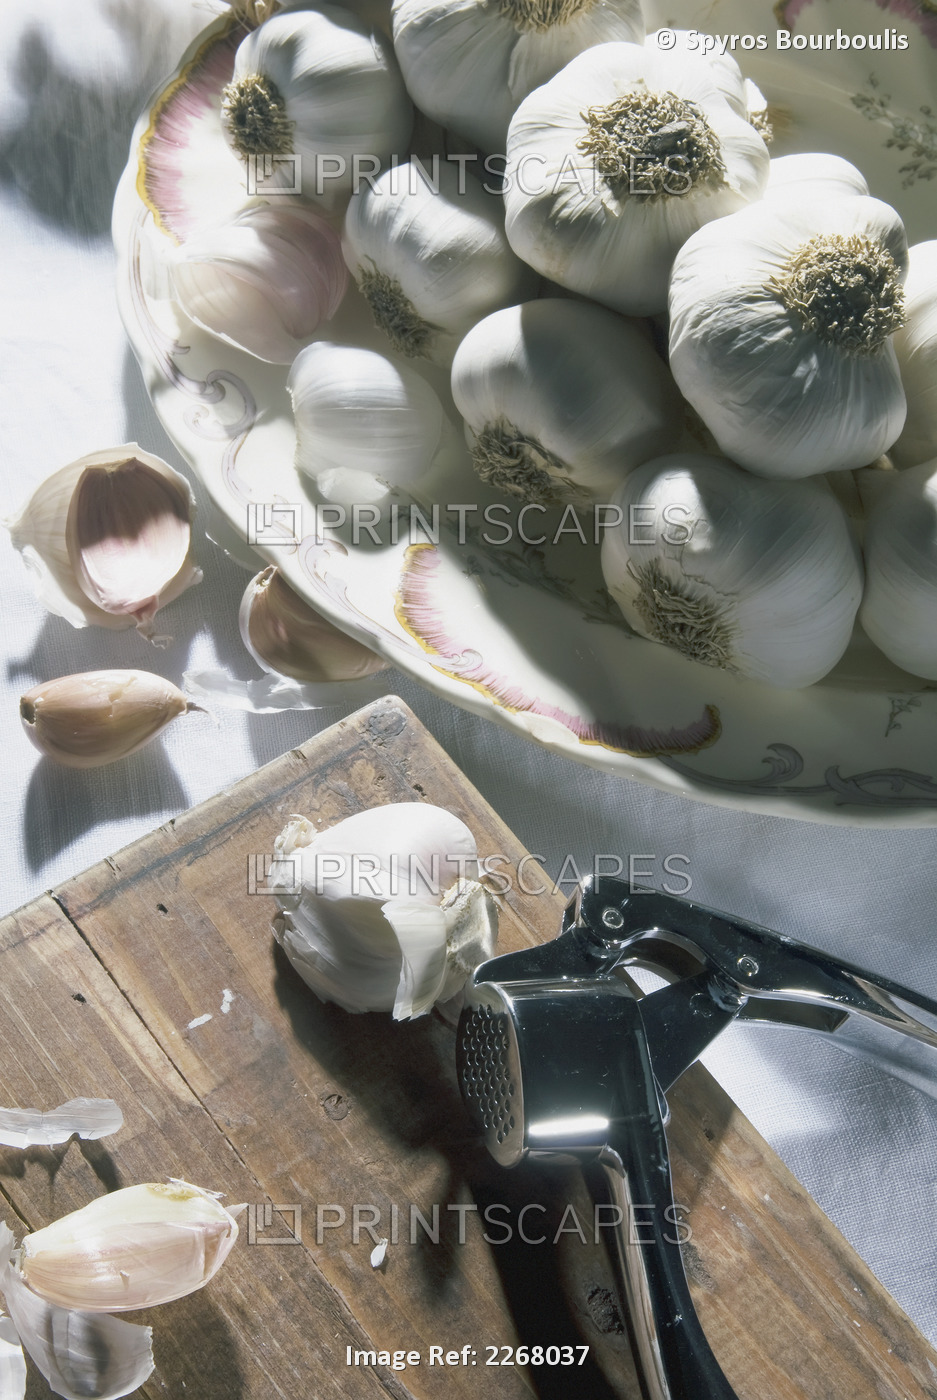 Cloves of garlic with a press